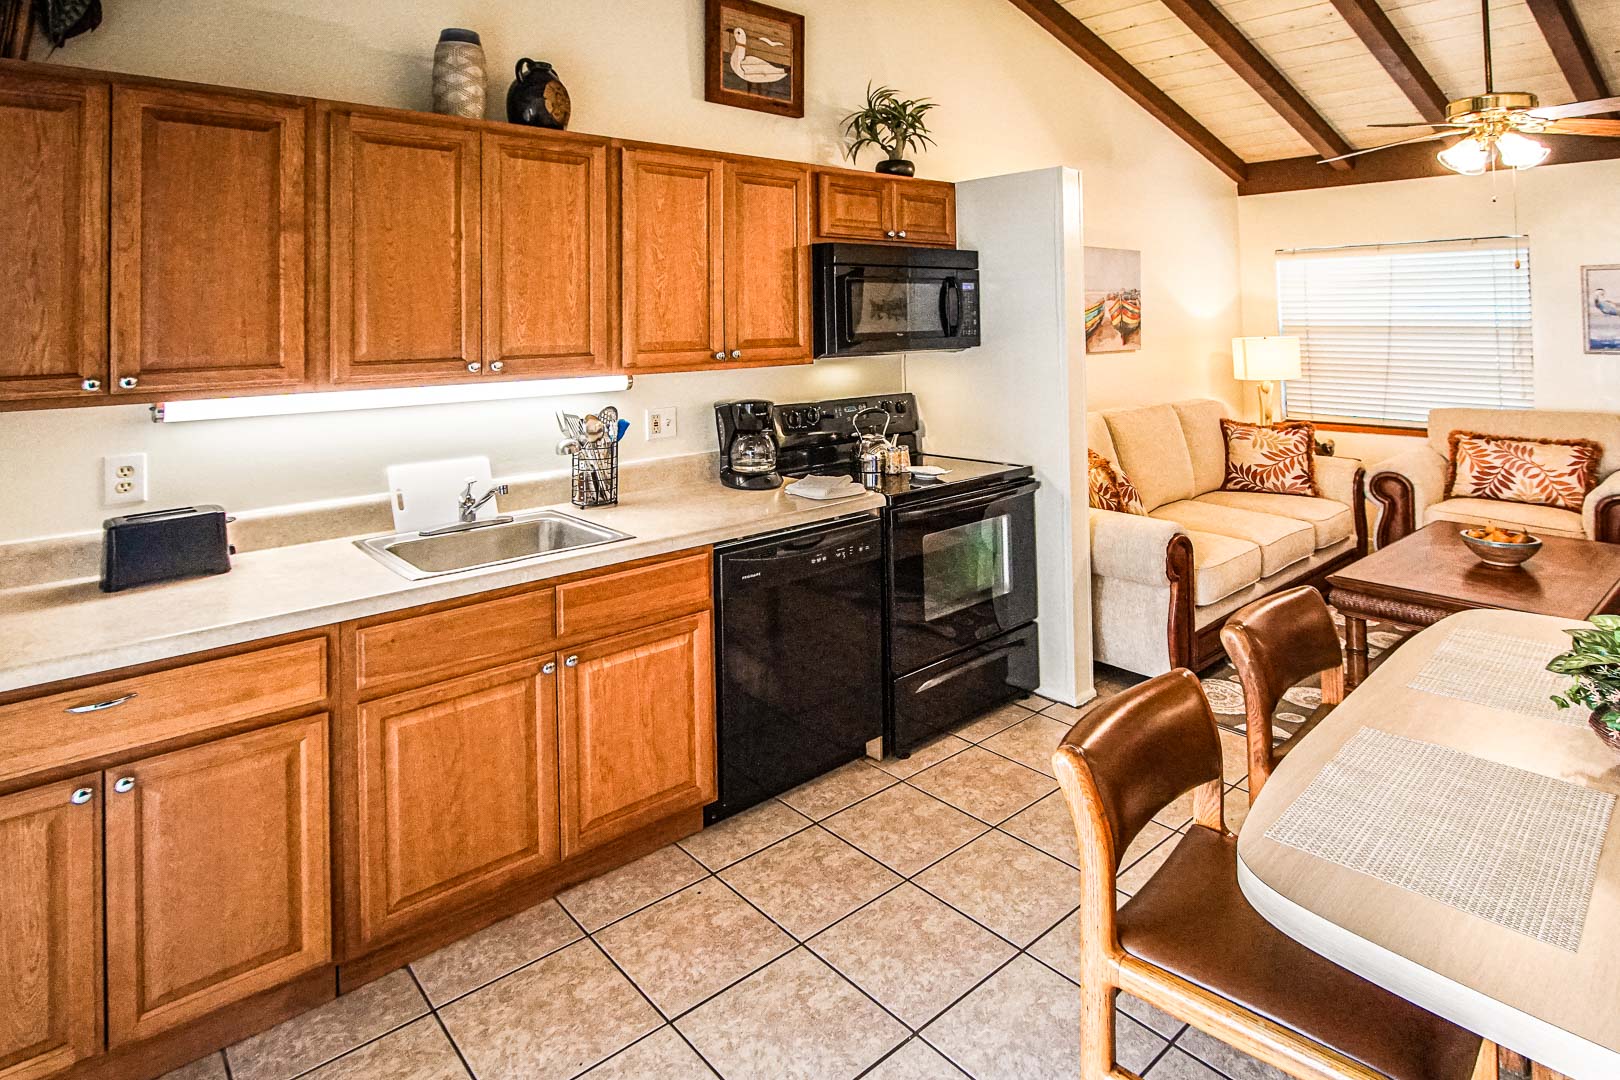 An expansive kitchen area at VRI's Sand Dune Shores in Florida.